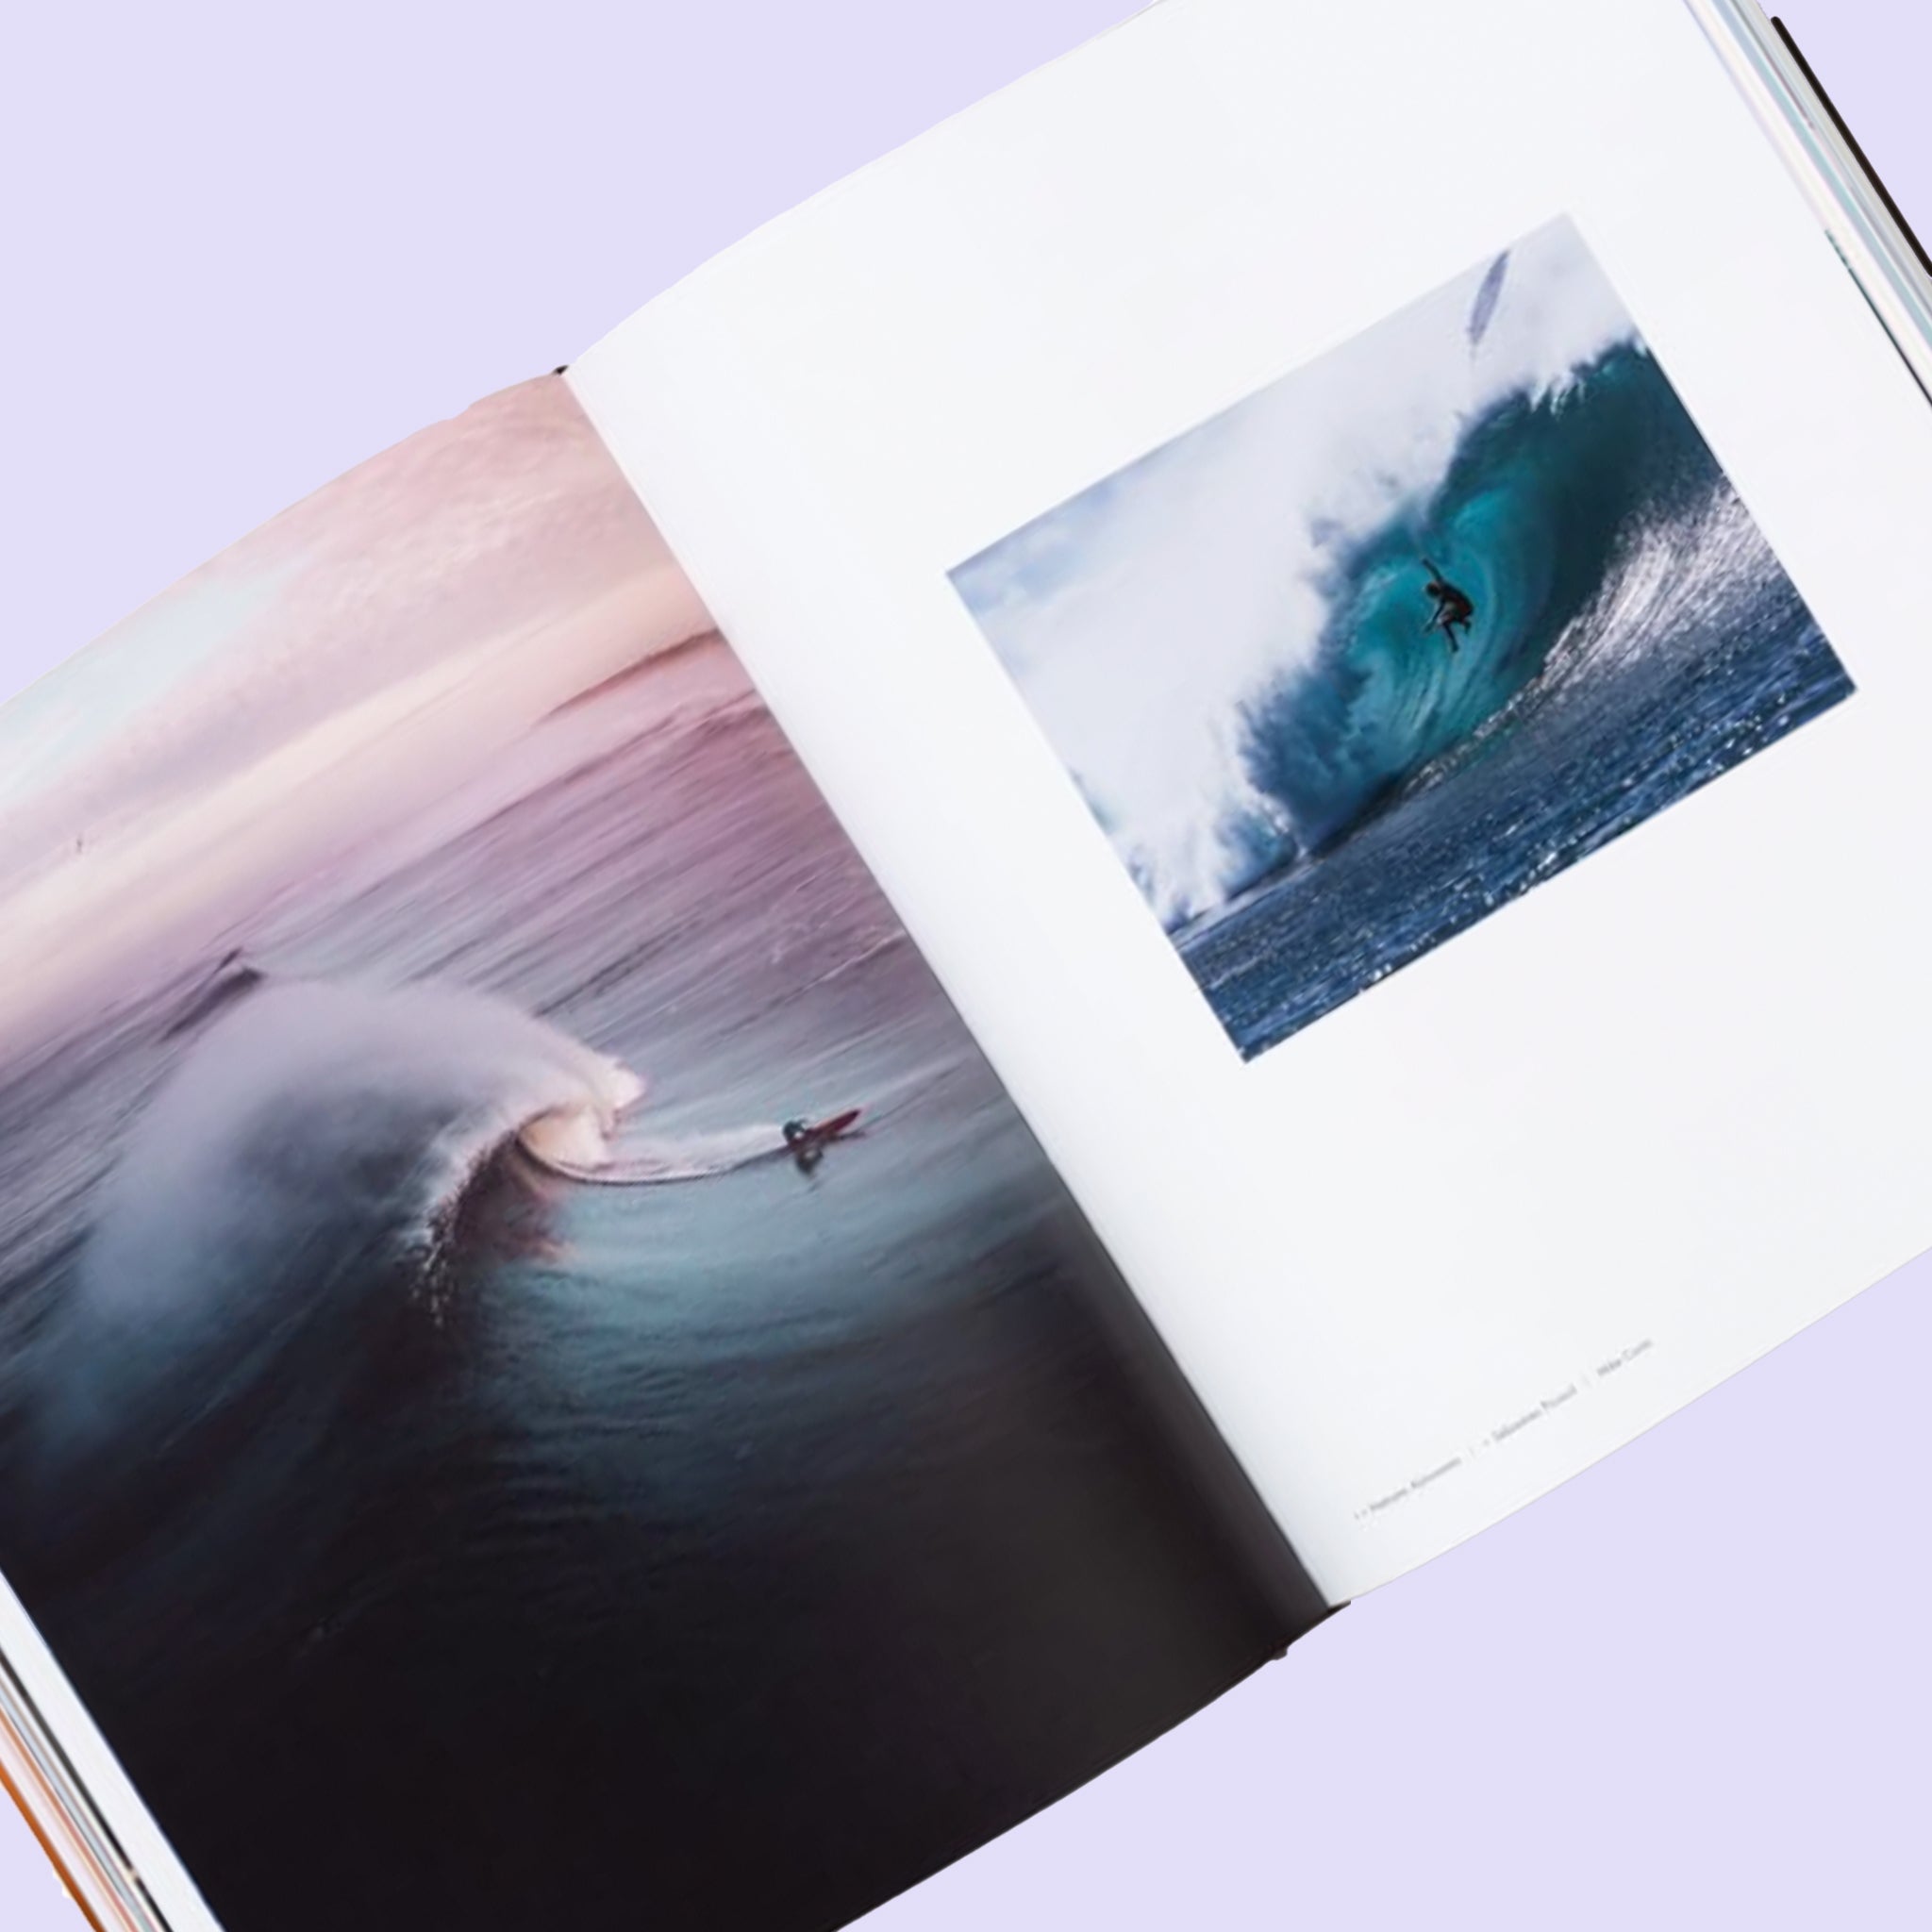 The book open to a page with beautiful photographs of surfers and waves.